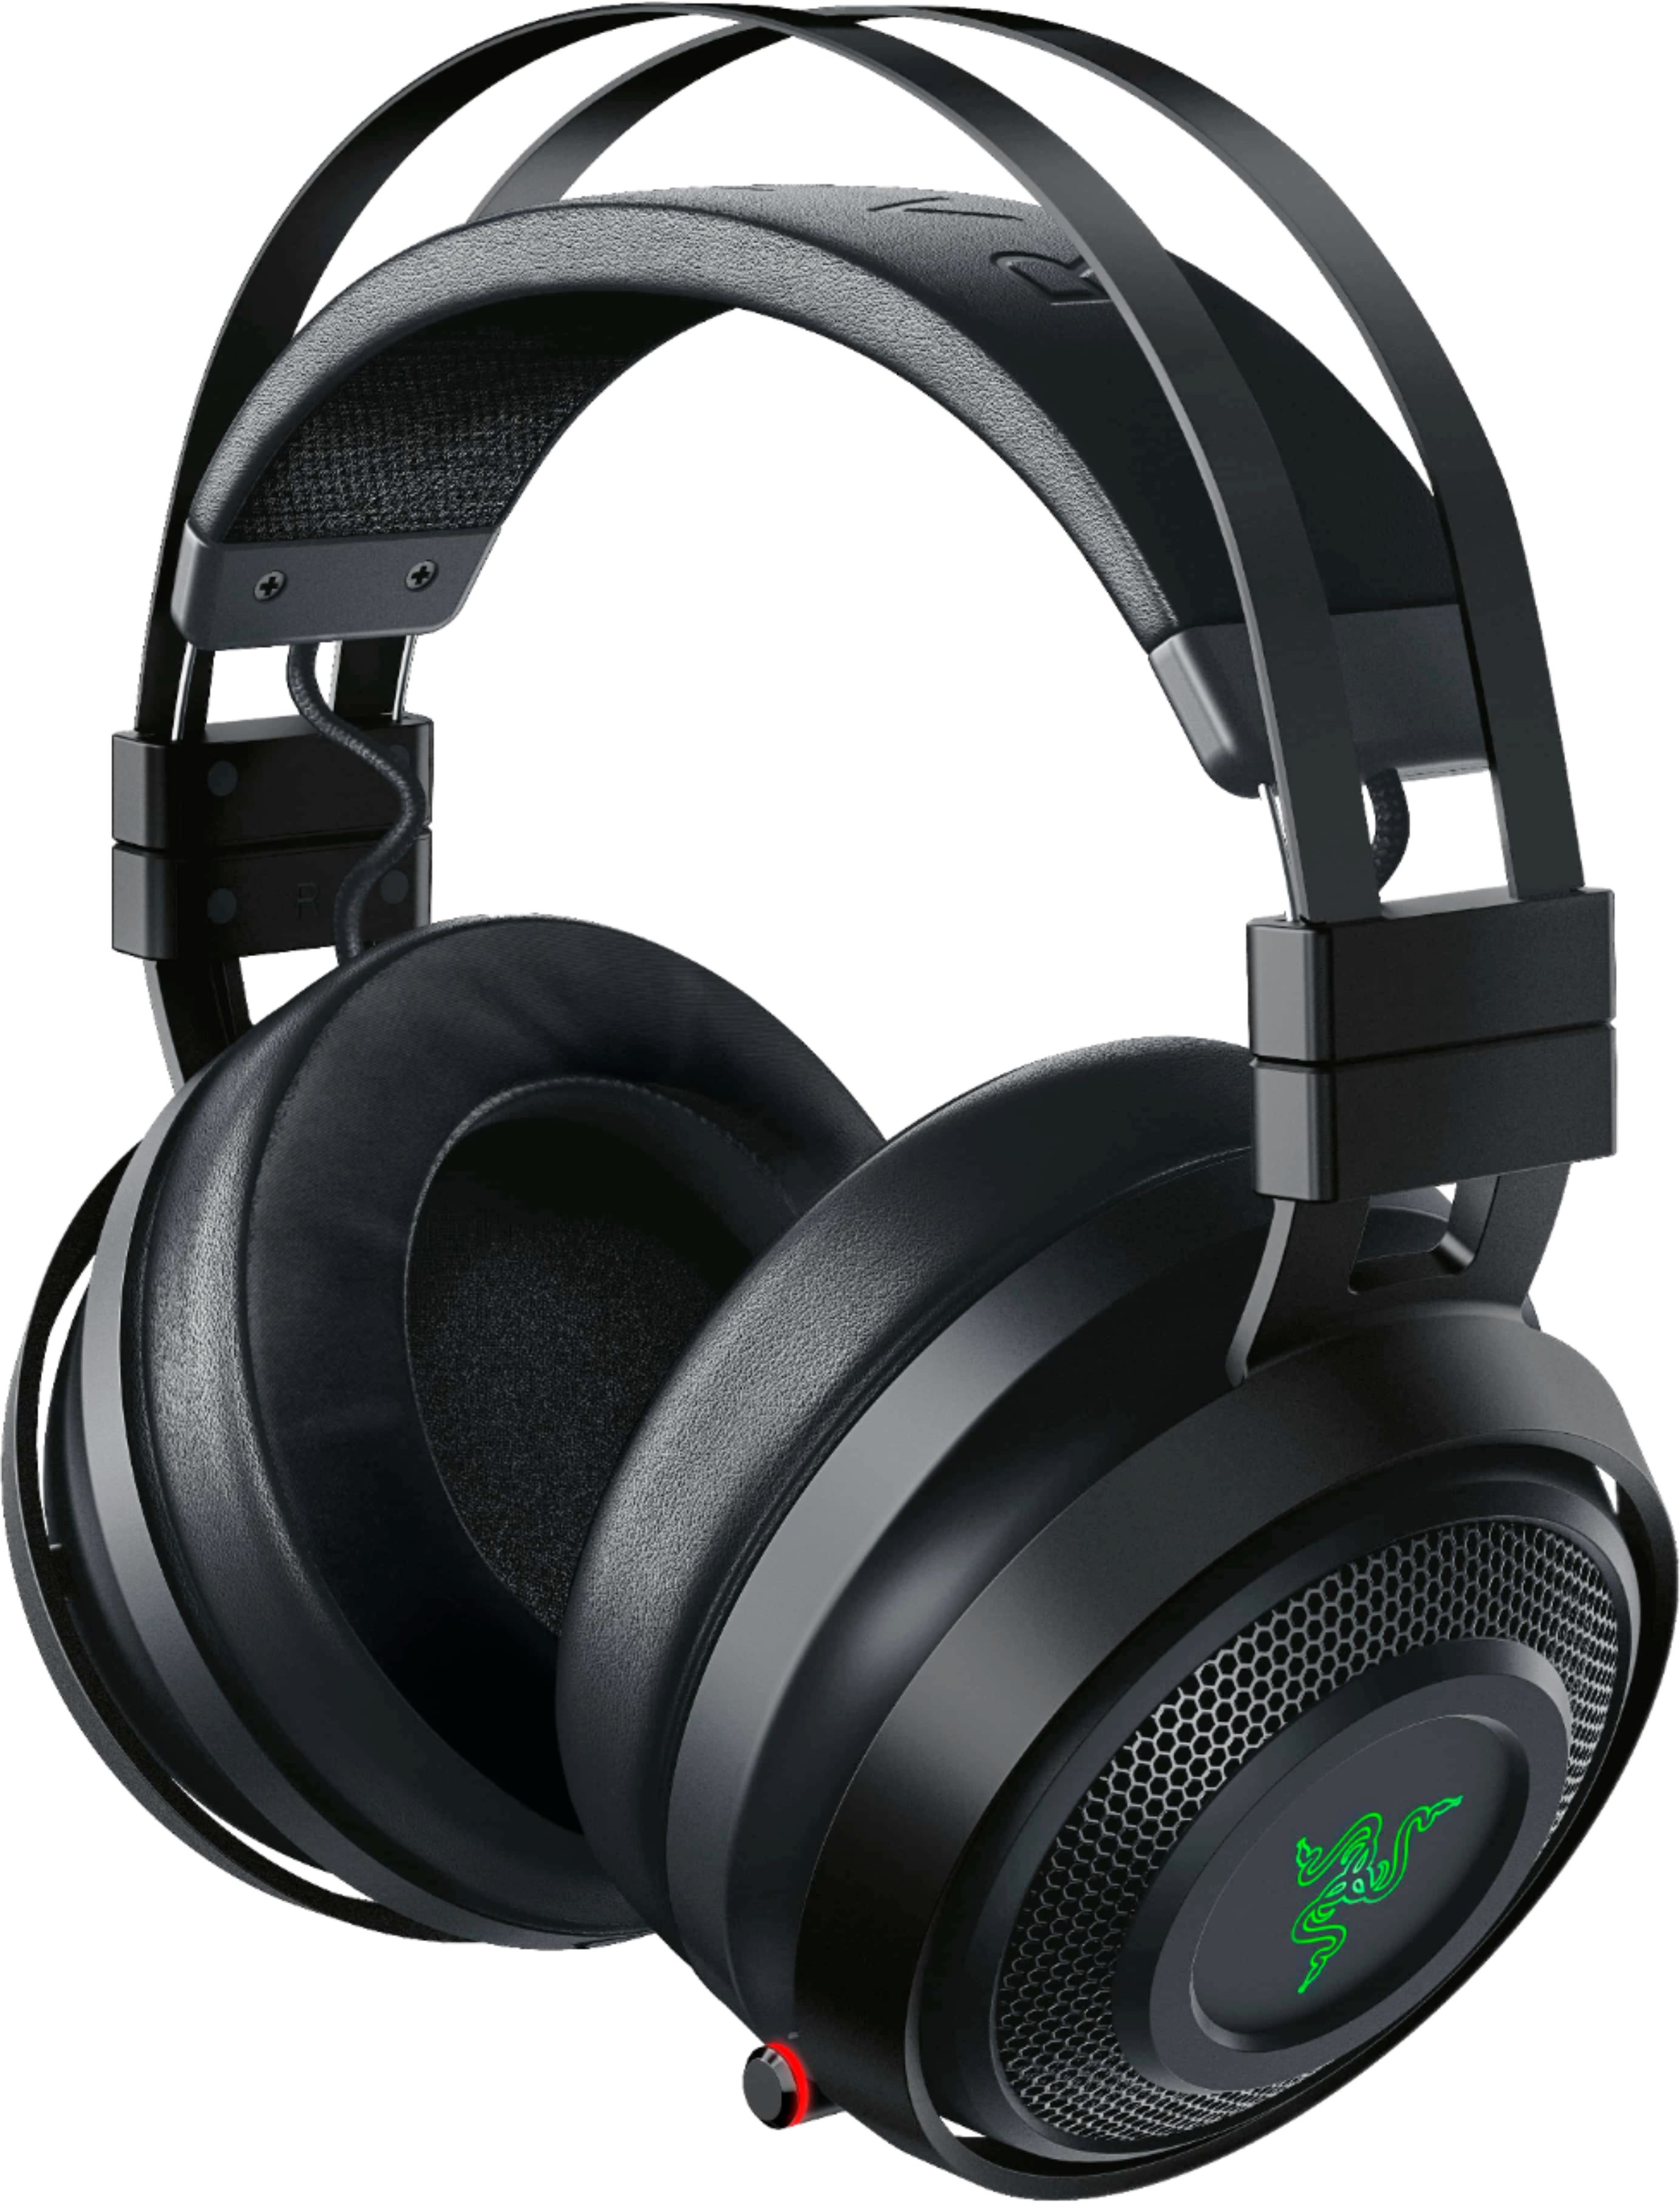 Angle View: Razer - Nari Ultimate Wireless THX Spatial Audio Gaming Headset for PC, PS5, and PS4 - Gunmetal